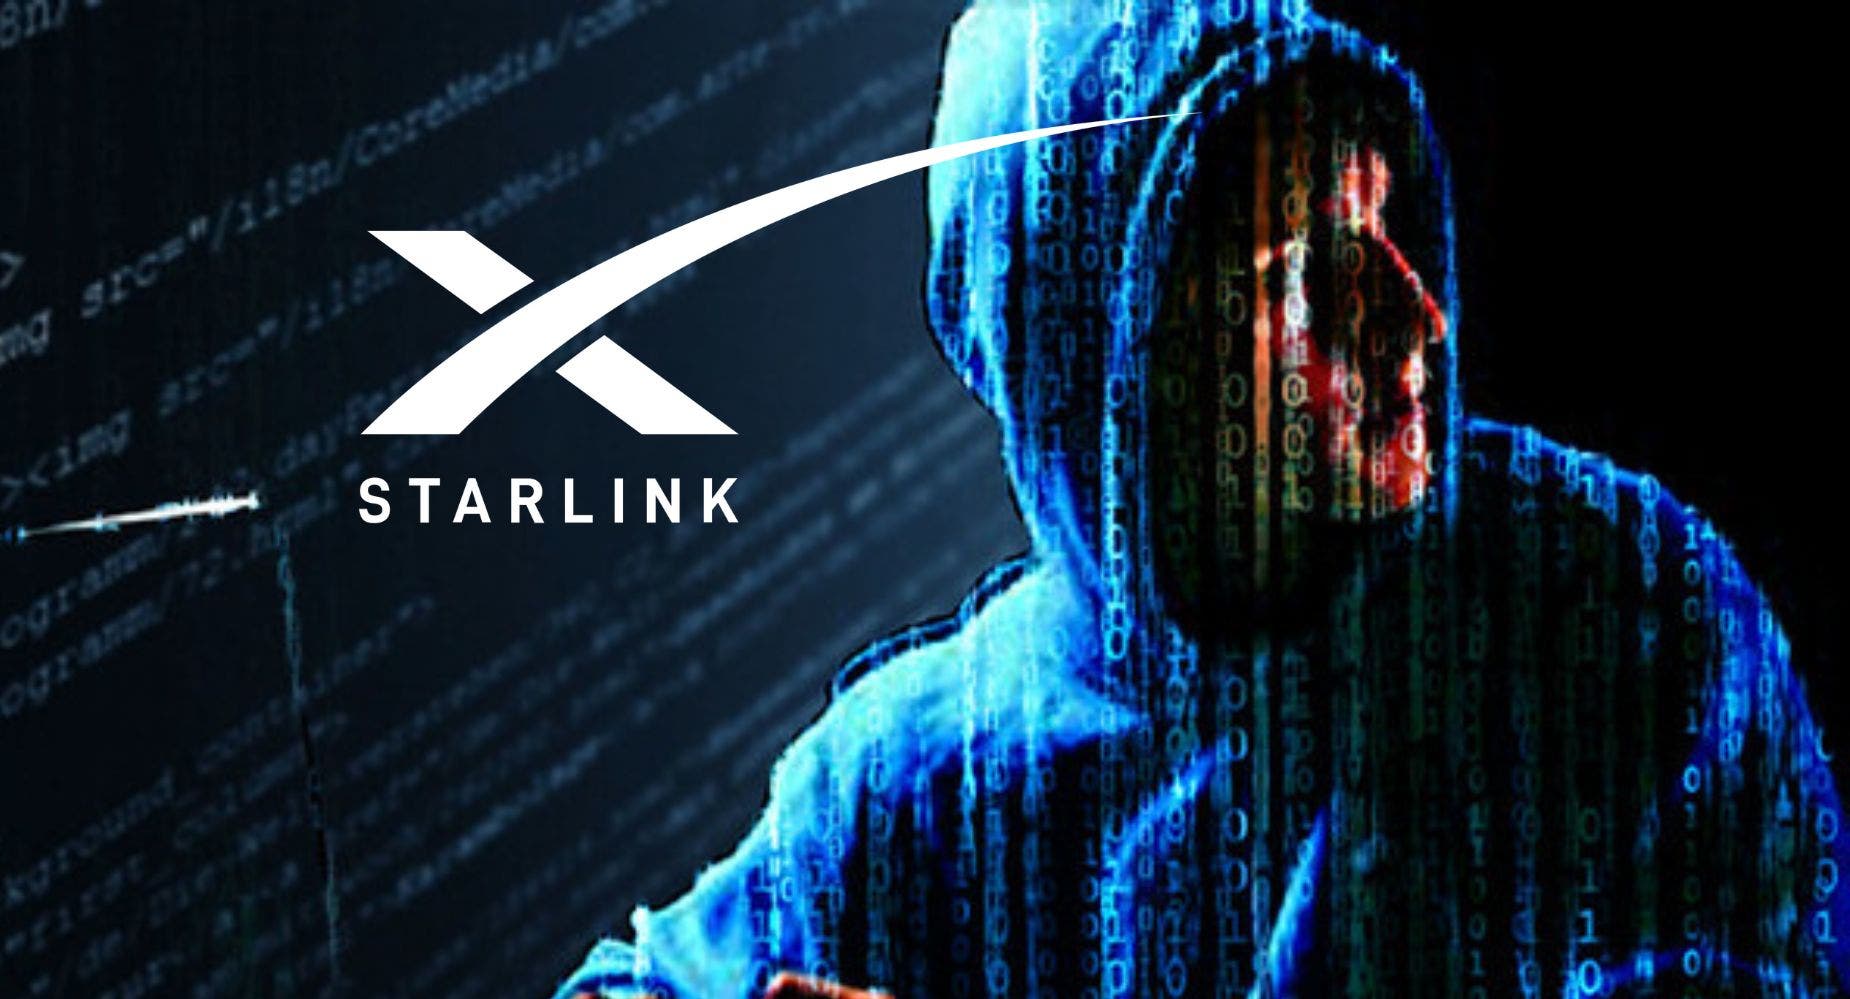 Is Elon Musk's Internet Service Safe? Researcher Develops $25 Tool To Hack Into Starlink Terminal